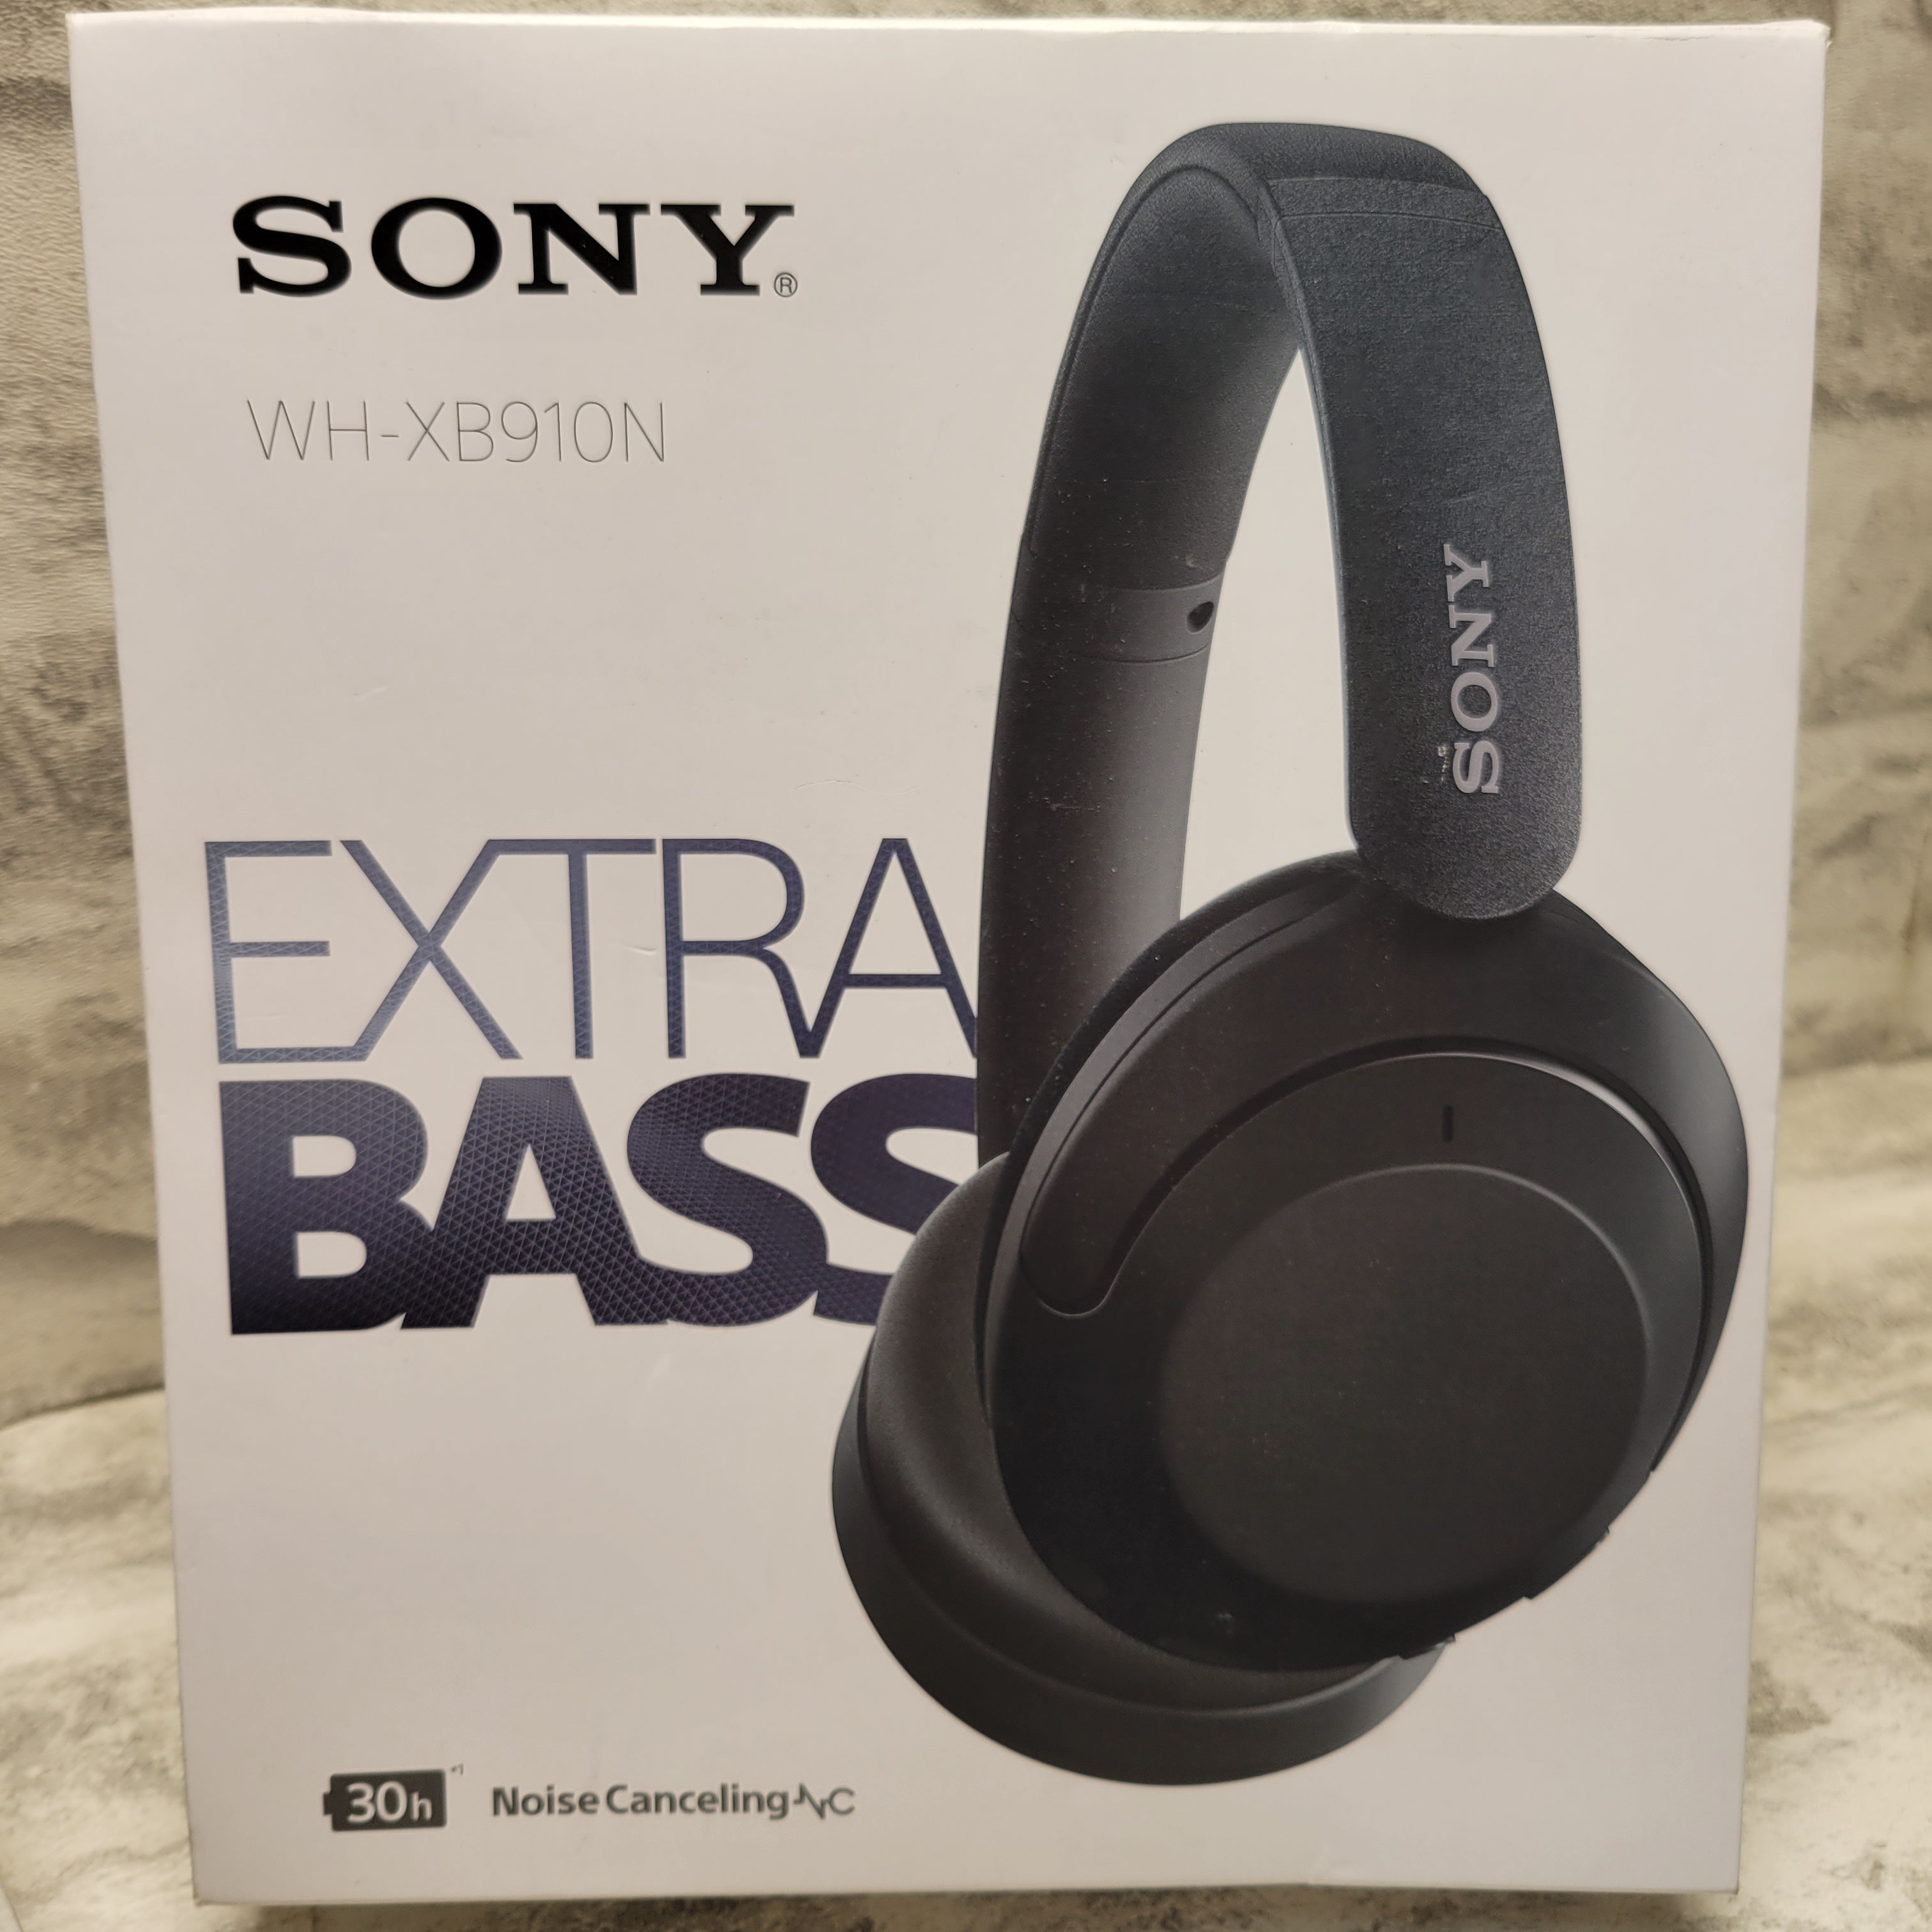 Sony WH-XB910N EXTRA BASS Noise Cancelling Headphones, Wireless Bluetooth Over the Ear Headset with Microphone and Alexa Voice Control, Black (7782032900334)